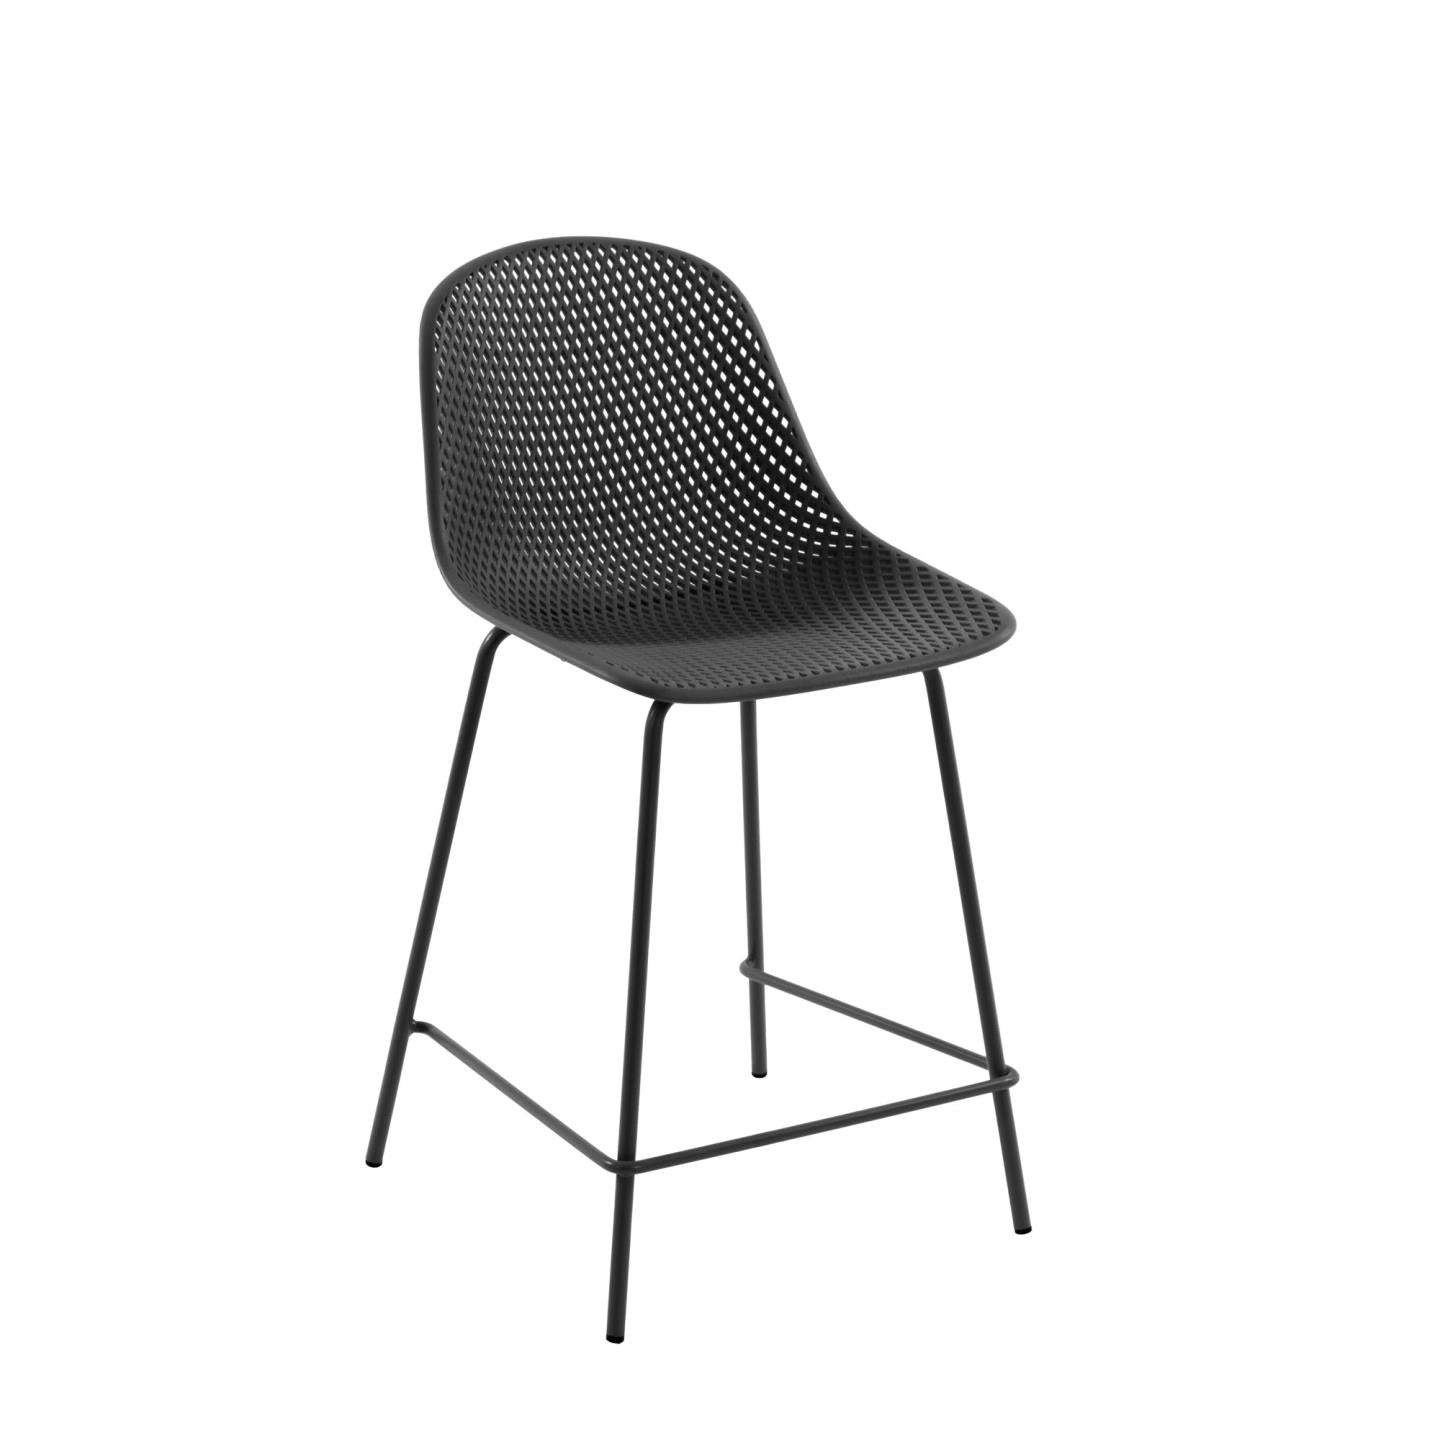 Quinby outdoor stool in grey, height 65 cm